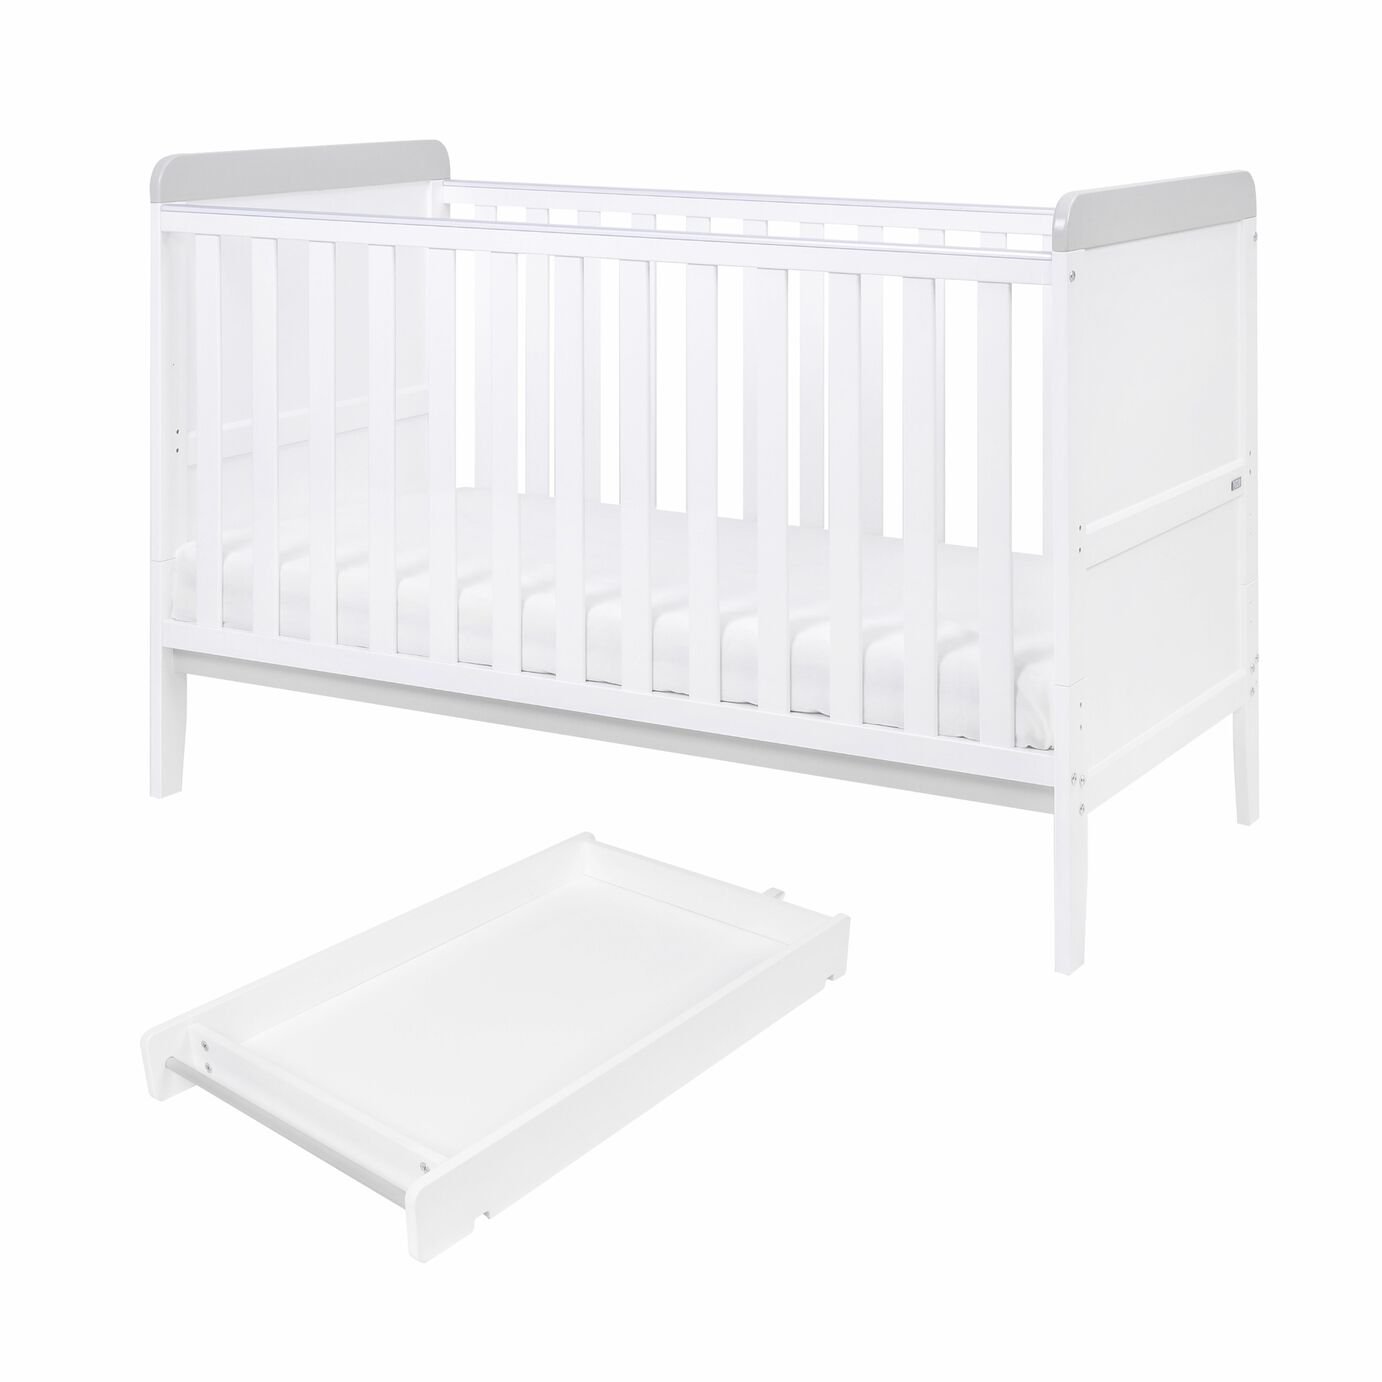 Tutti Bambini Rio Cot Bed & Changer with Mattress Review